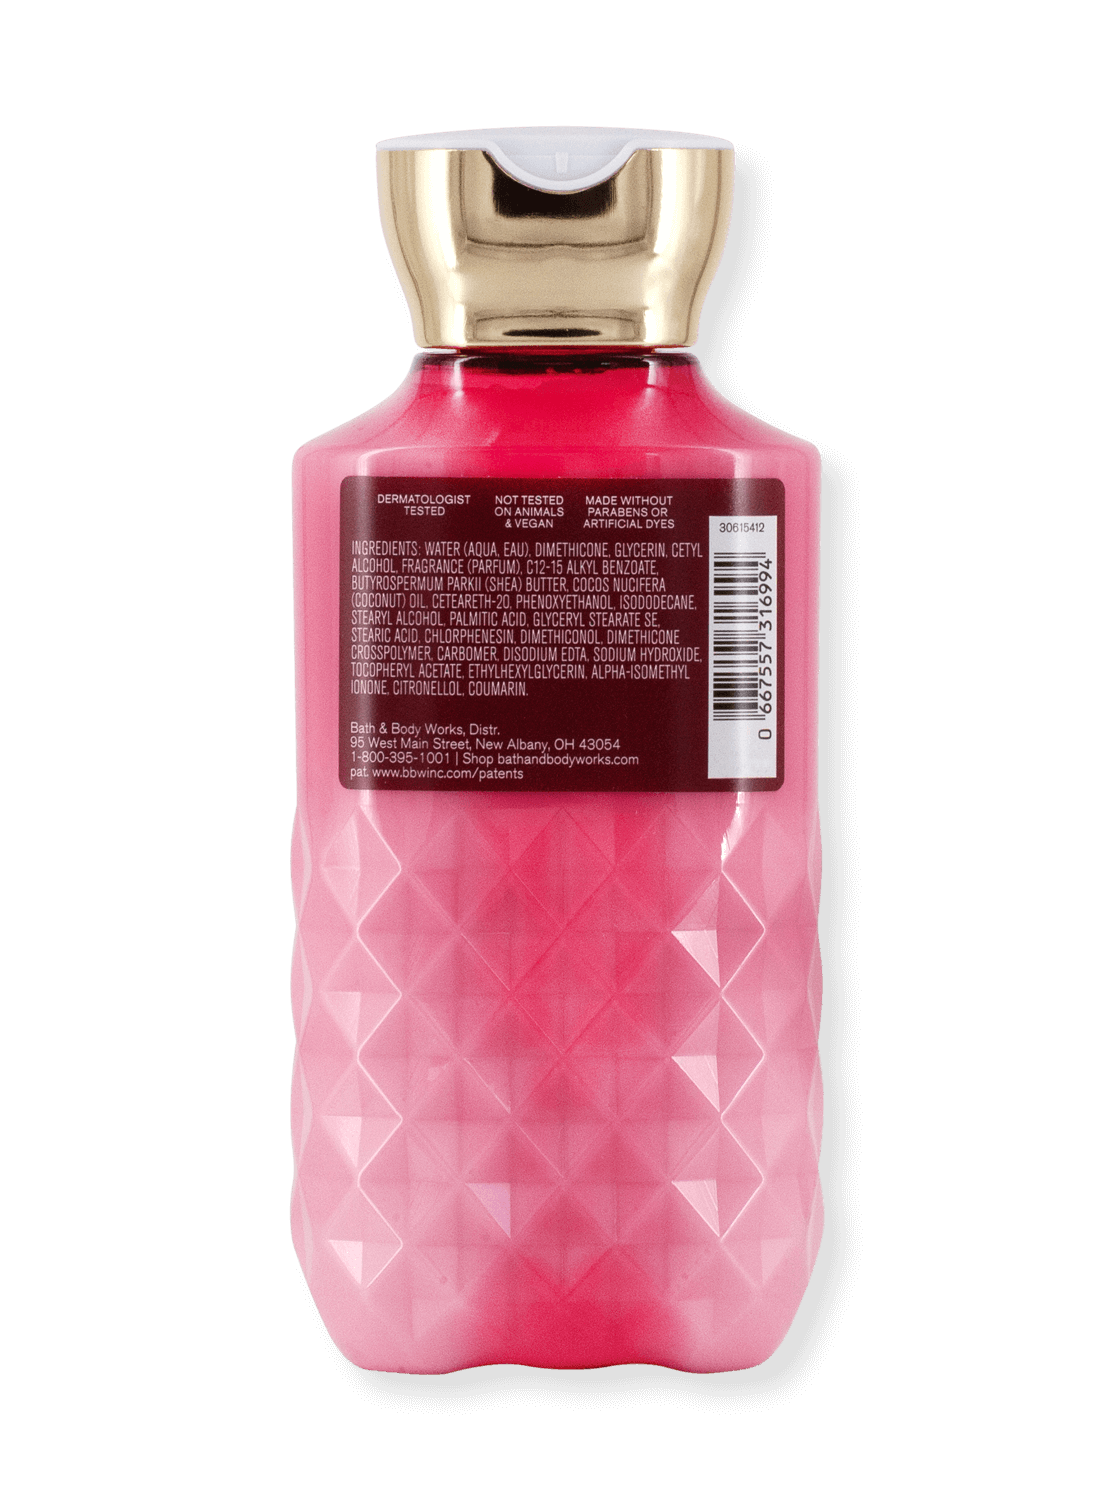 Body Lotion - Forever Red  - 236ml